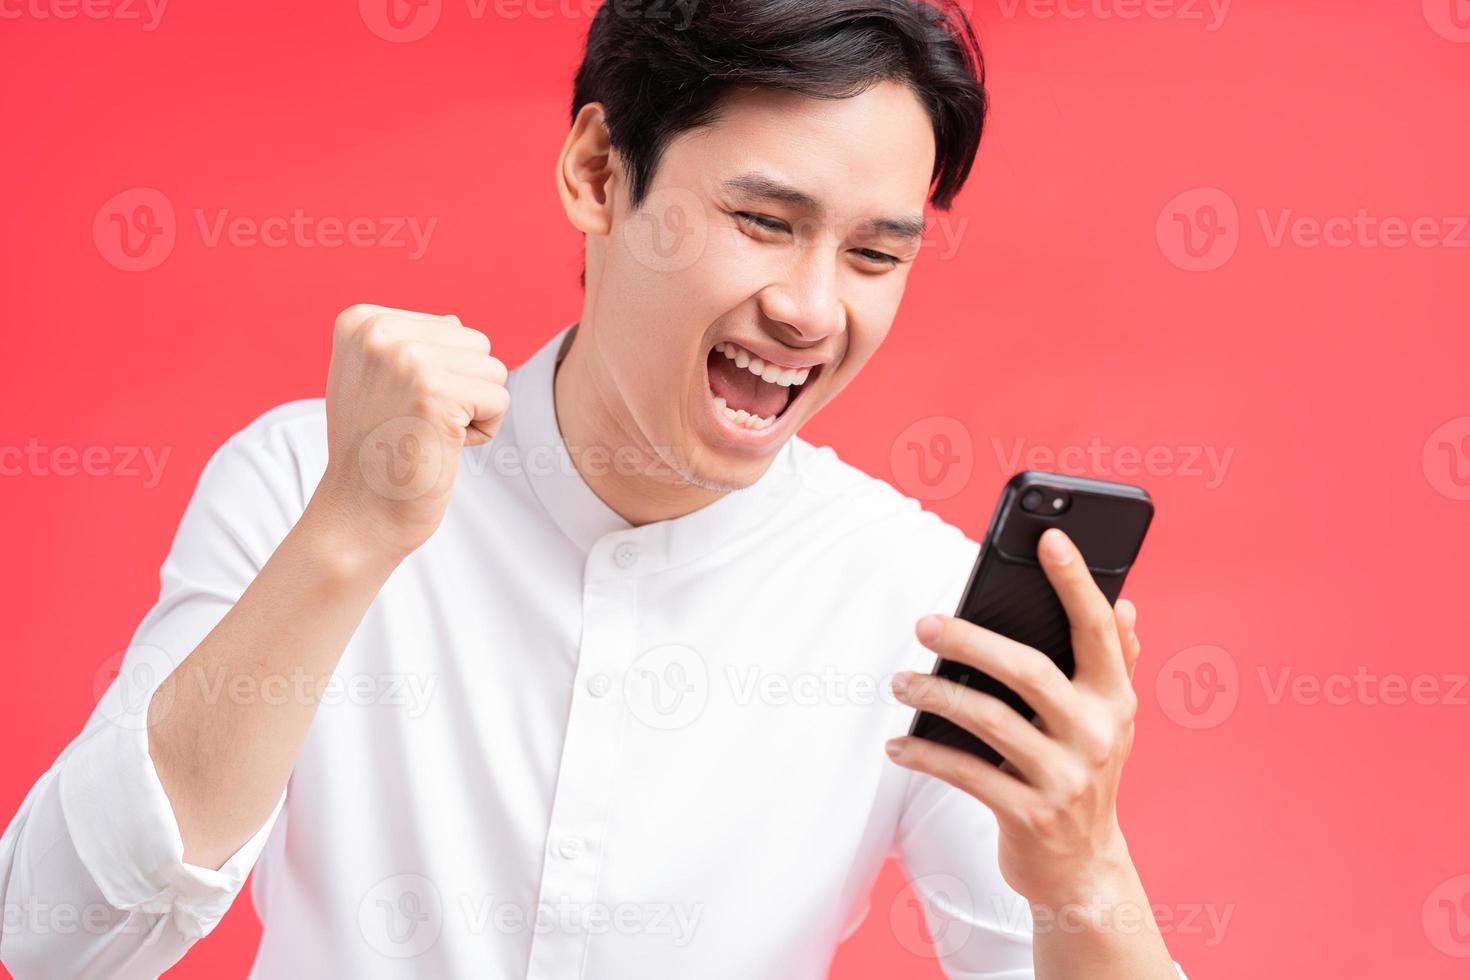 A photo of the man celebrating his victory when he received a text message on his cell phone